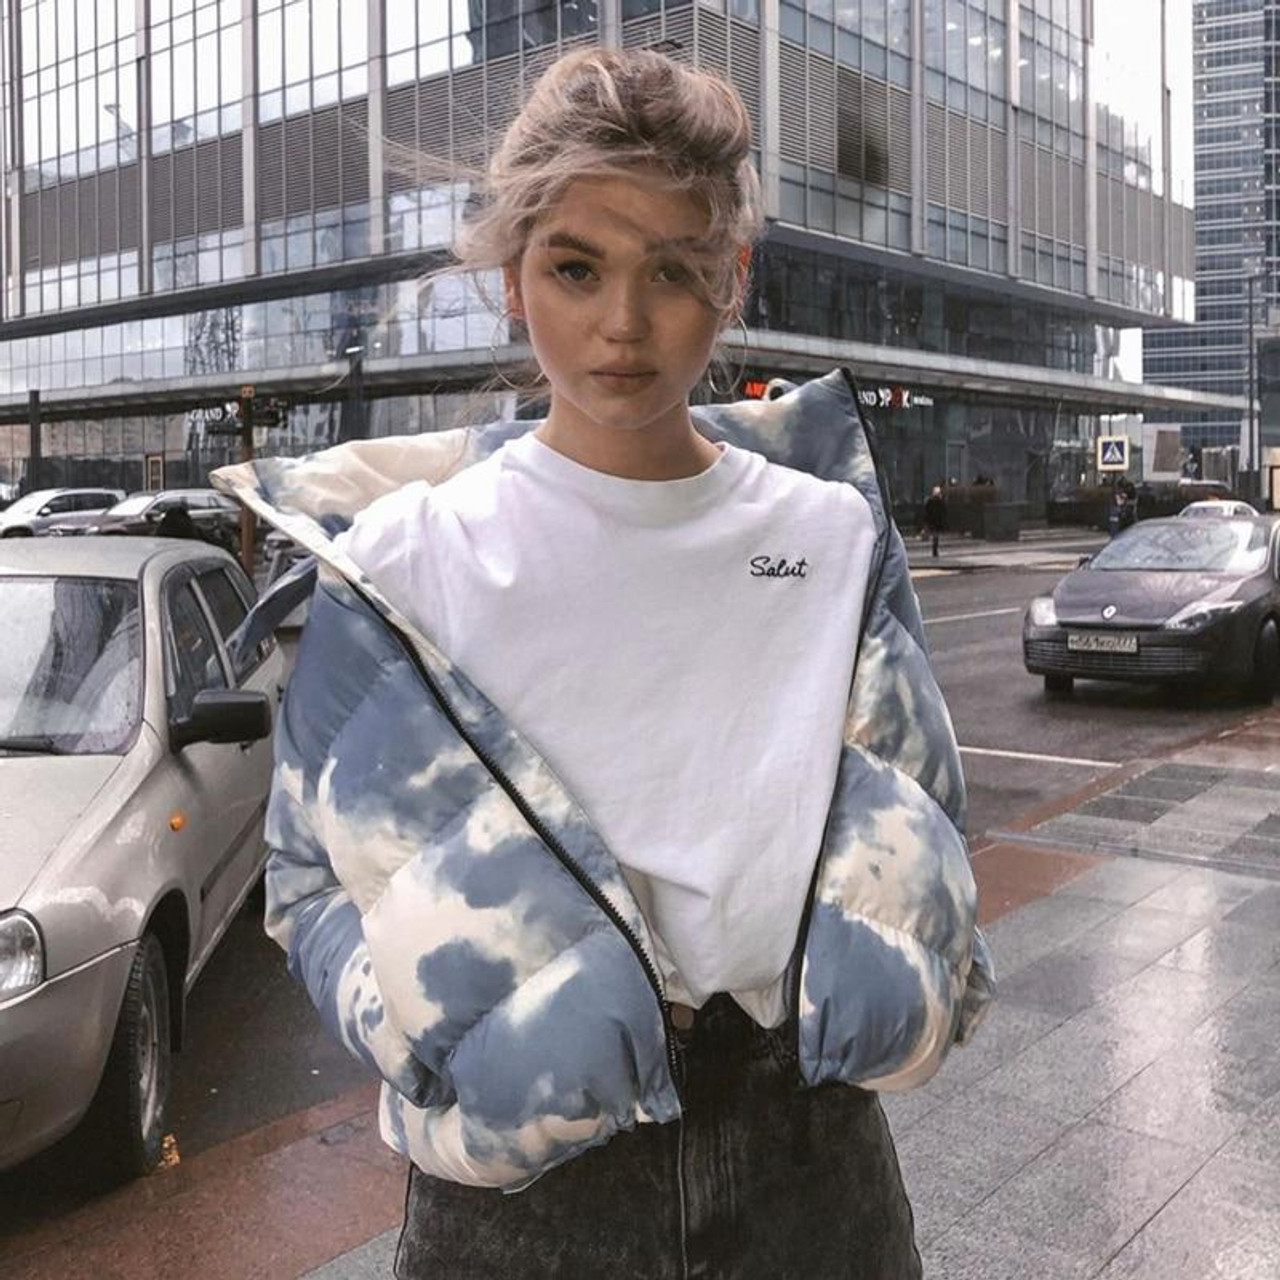 https://cdn11.bigcommerce.com/s-c7qlm8a06j/images/stencil/1280x1280/products/1940/17172/korean-tie-dye-cropped-jacket-cosmiquestudio-aestheticoutfits__28991.1644002739.jpg?c=1?imbypass=on